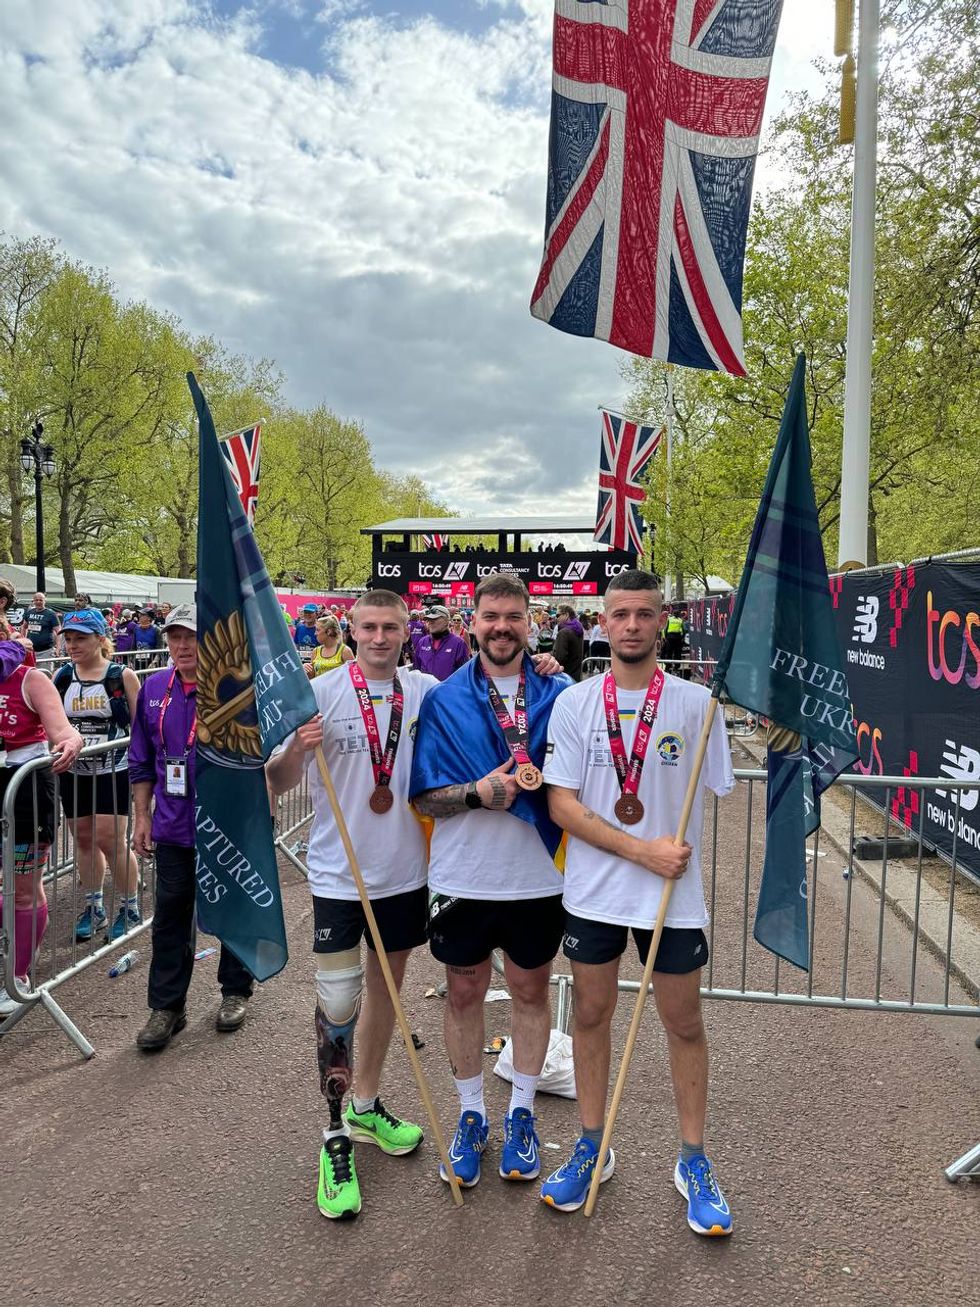 The men at the London Marathon holding flags